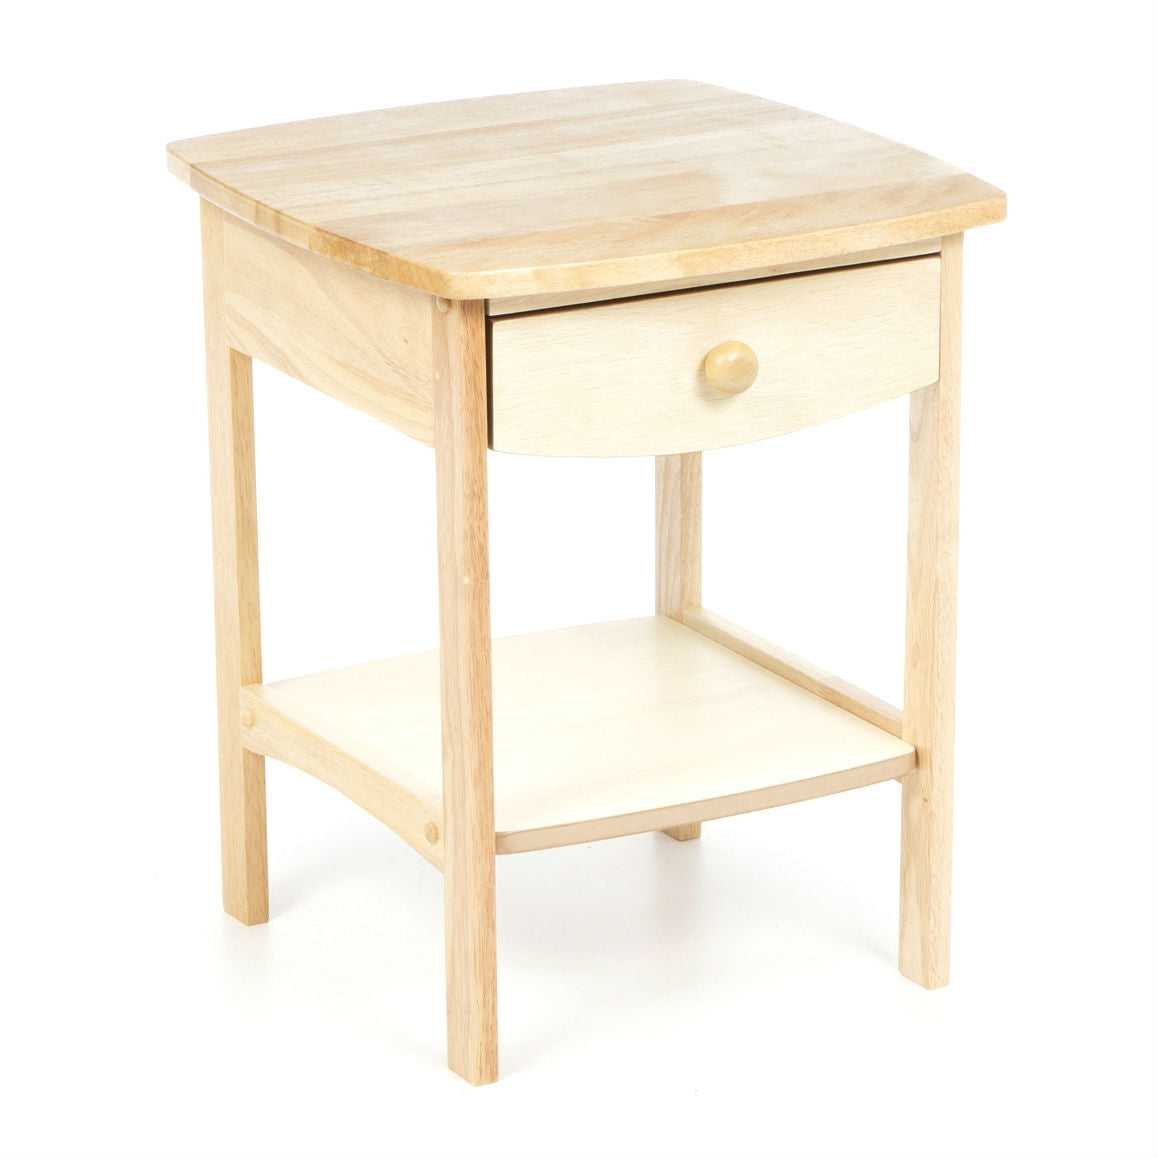 Natural Wood Finish 1-Drawer Bedroom End Table Nightstand